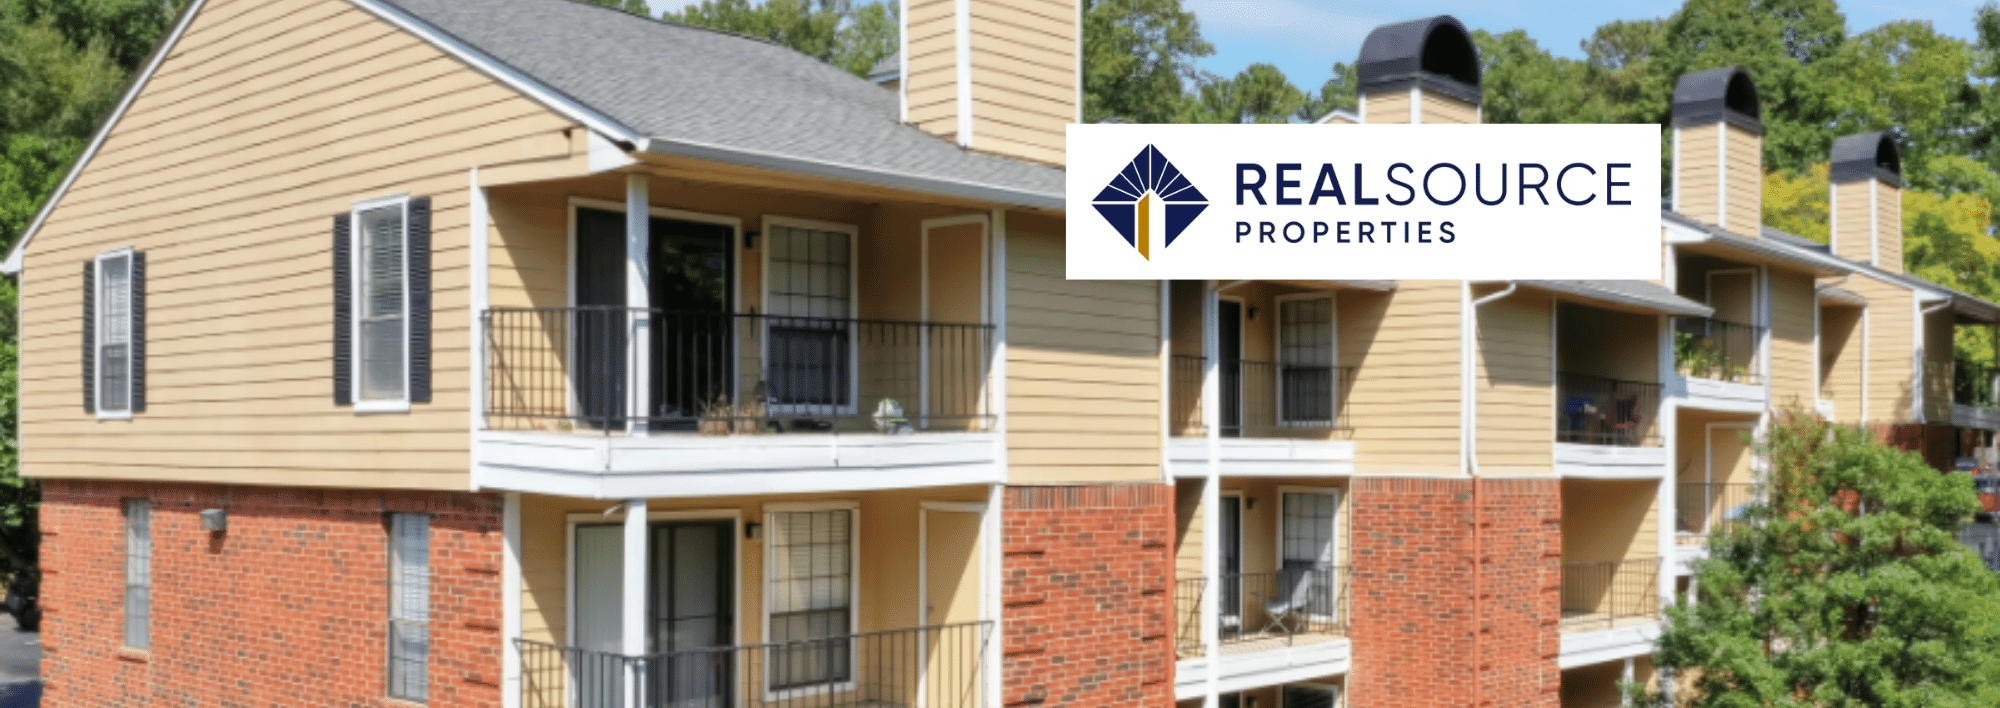 New Client: Multifamily Real Estate Fund Sponsor RealSource Properties